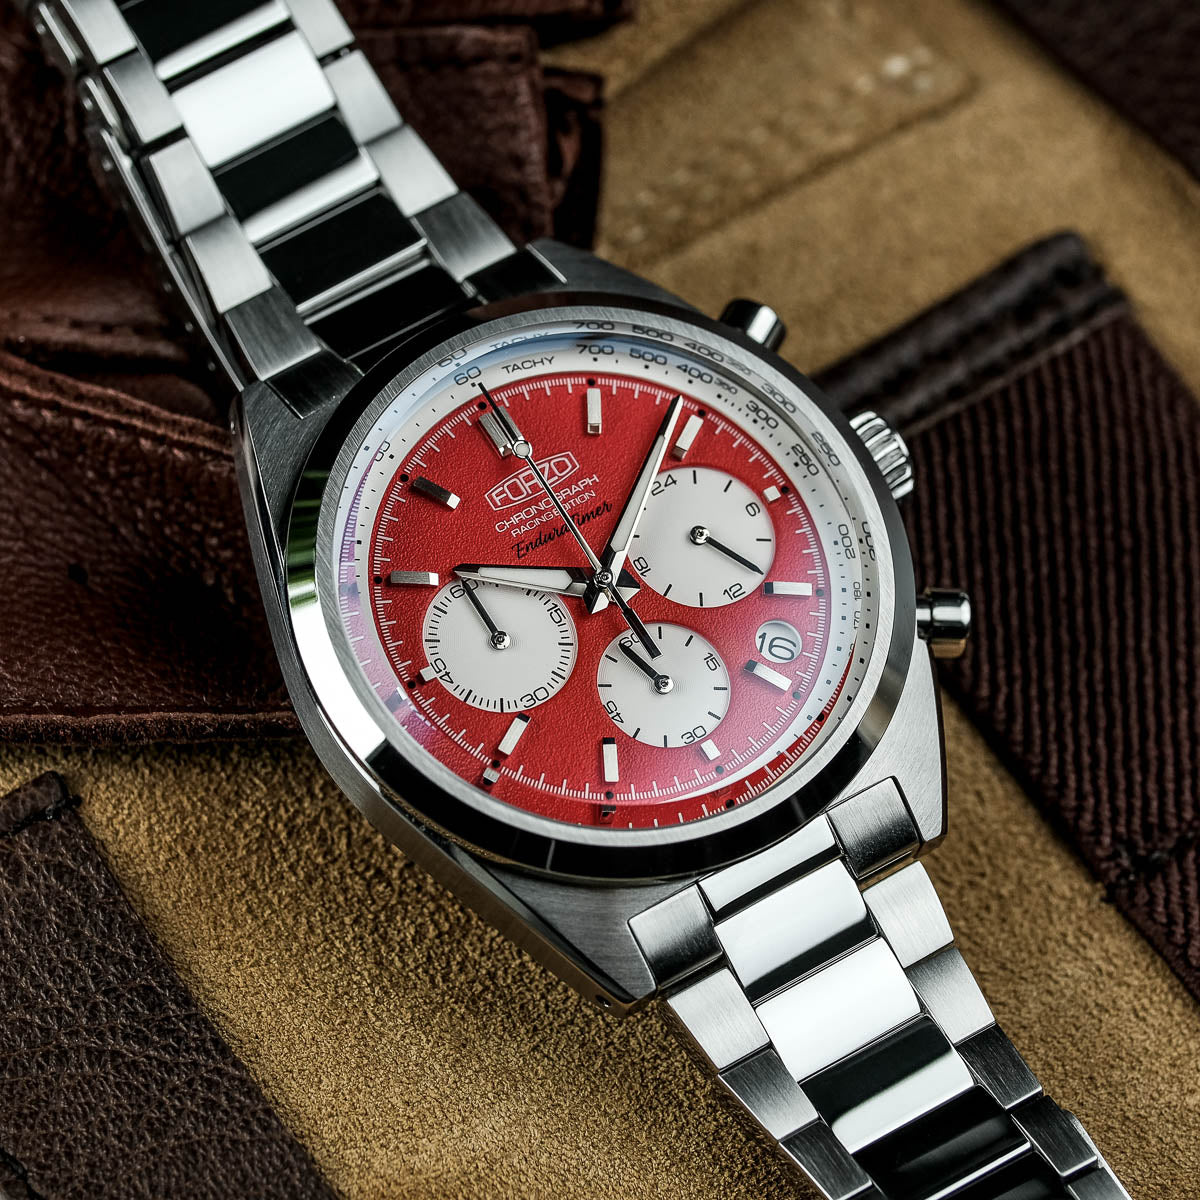 Limited Edition Carl Fogarty 'Foggy' Chronograph Watch | Red and White - additional image 3